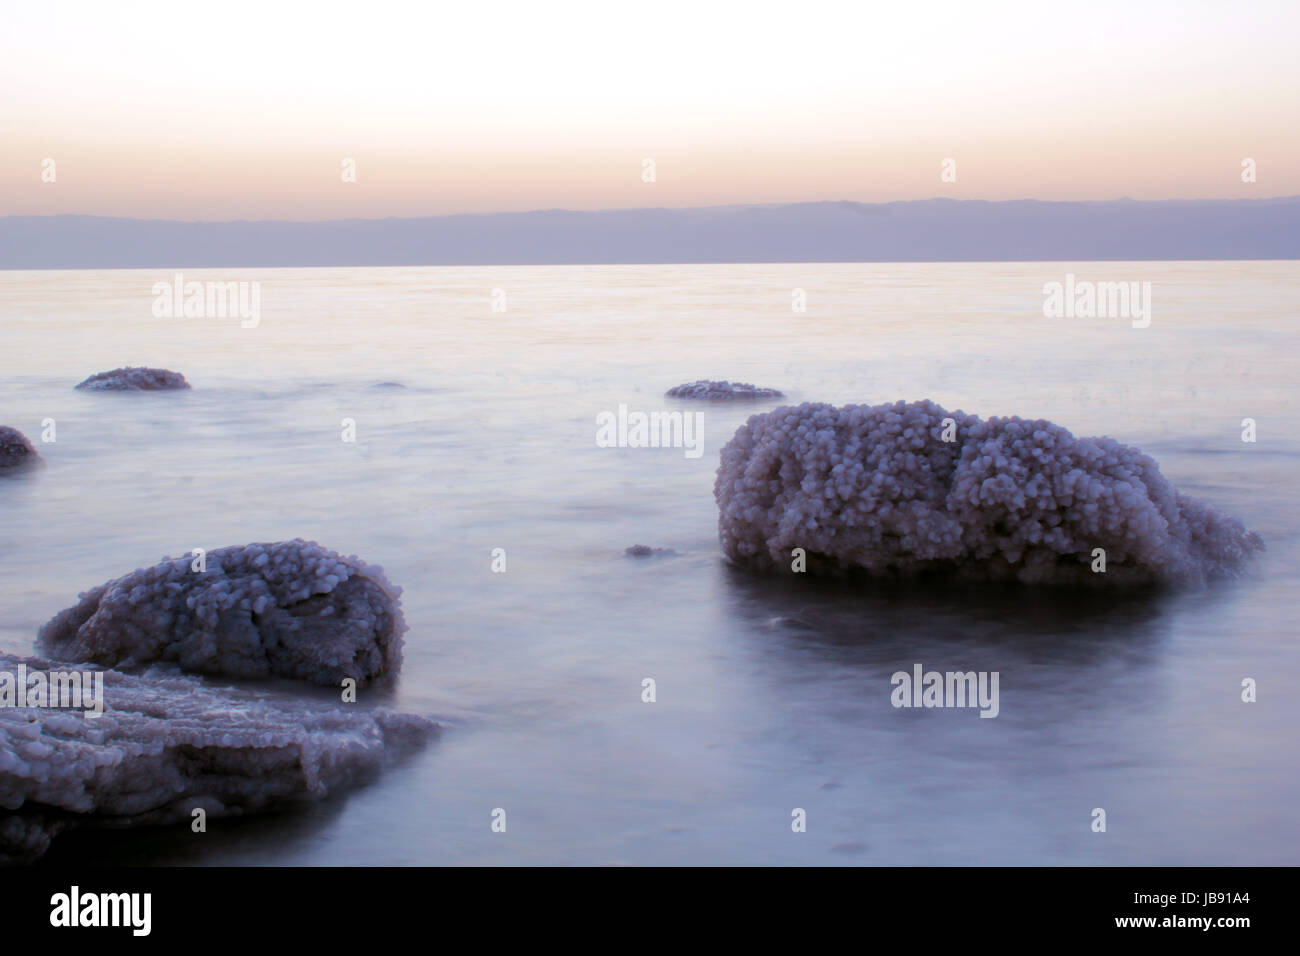 Dead Sea coastline, whit salt crystals and formations in the rocks. Jordan Stock Photo